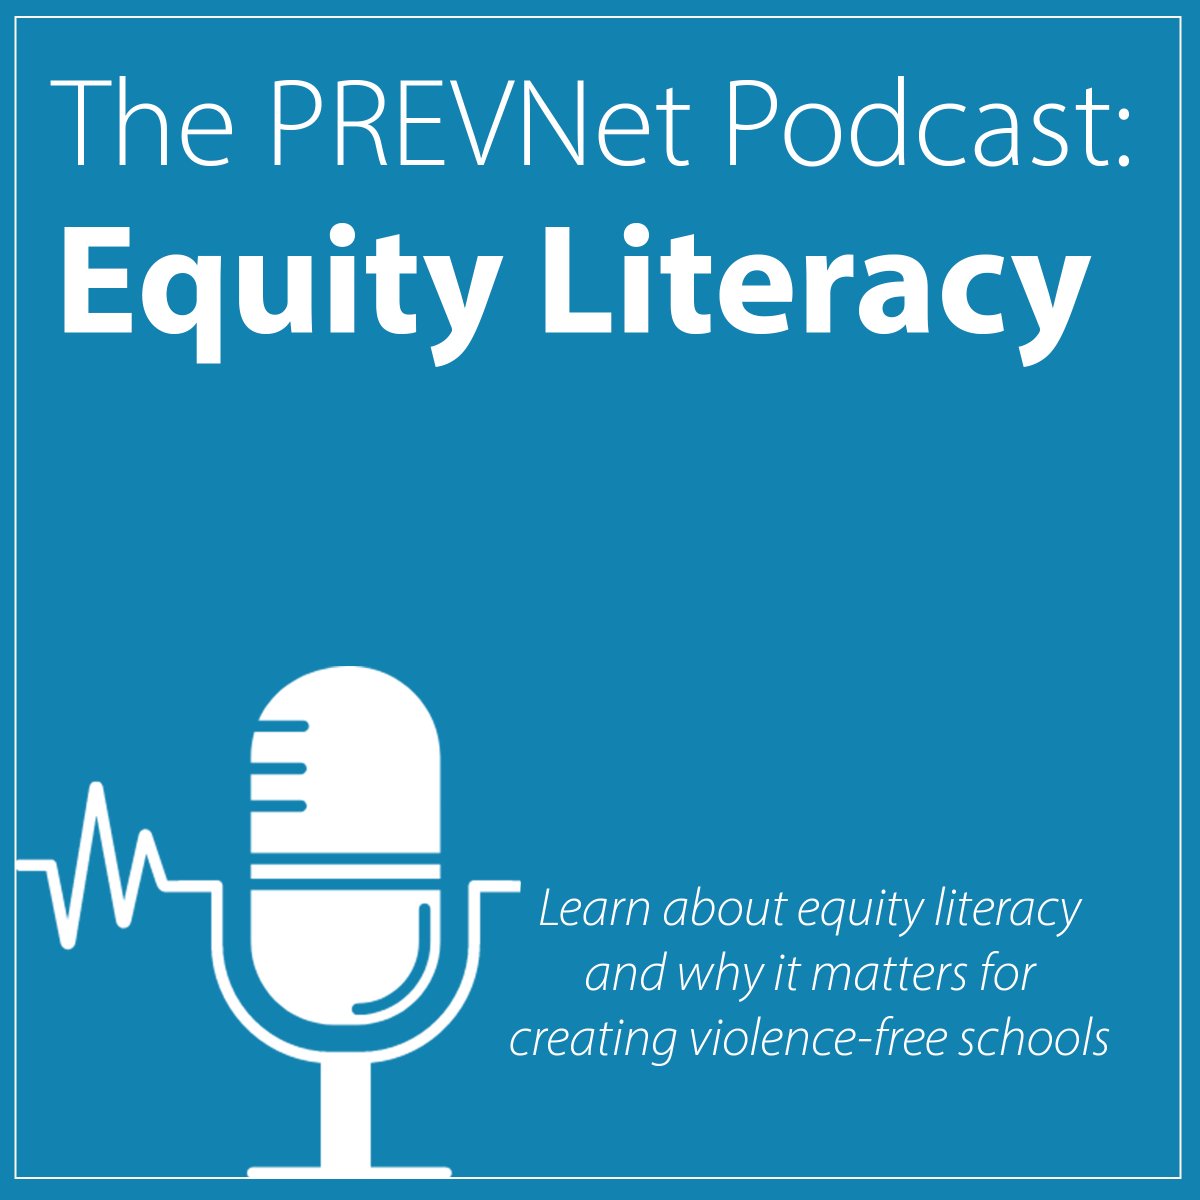 The PREVNet Podcast is now on Spotify! 

Listen to our Equity Literacy episode by searching "The PREVNet Podcast" or by clicking here: https://t.co/BkcpU8KBpq

Stay tuned for more episodes coming soon! 